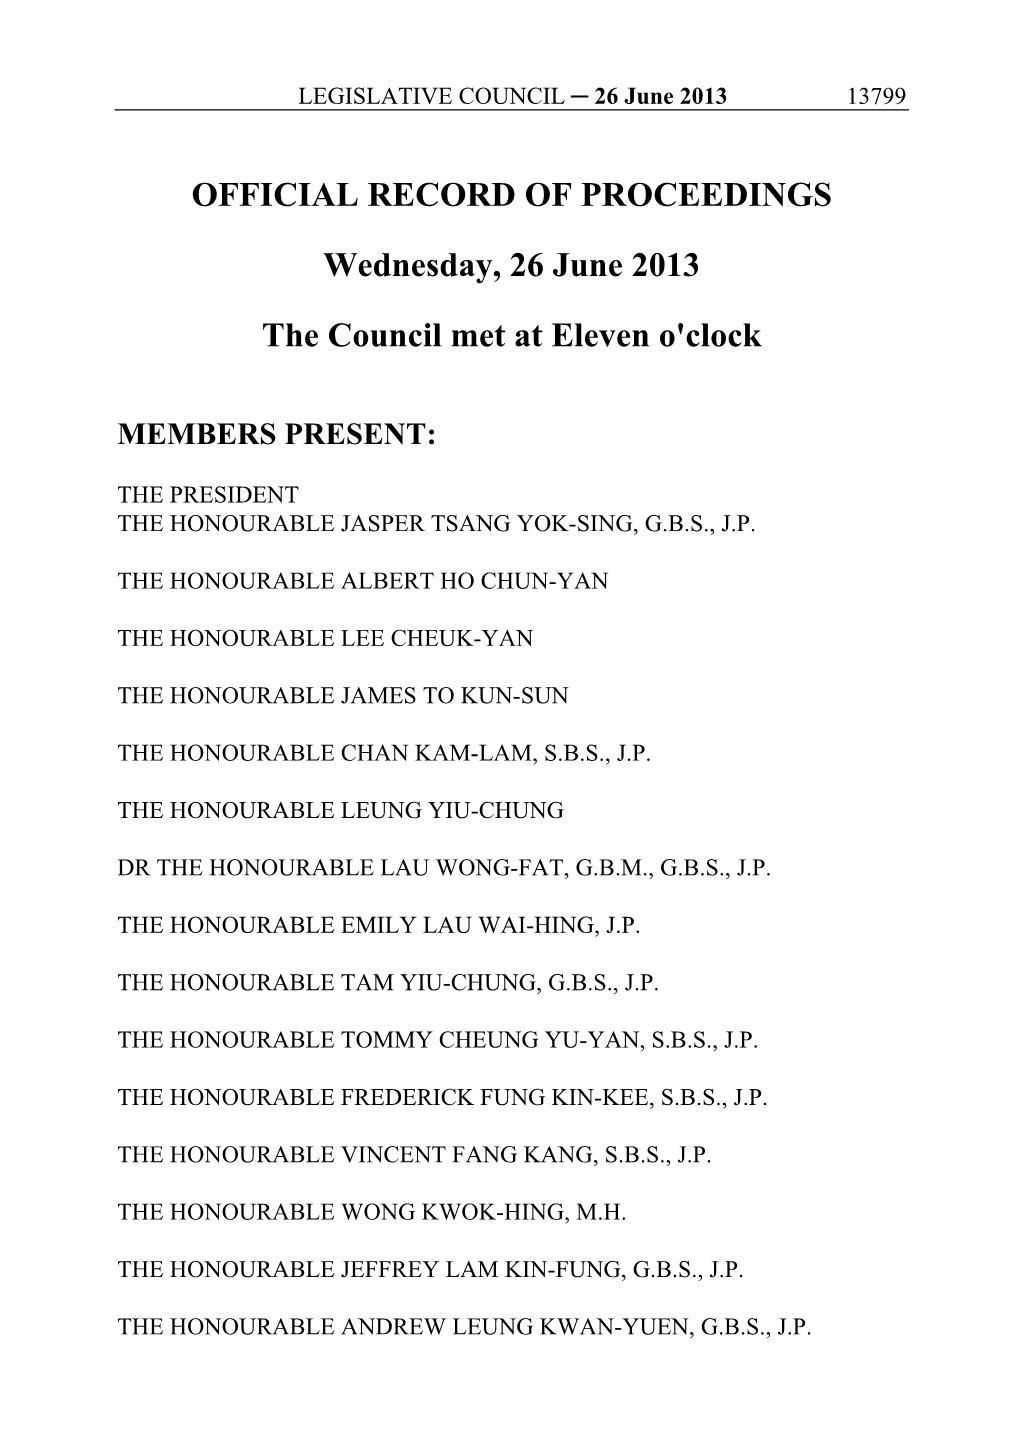 OFFICIAL RECORD of PROCEEDINGS Wednesday, 26